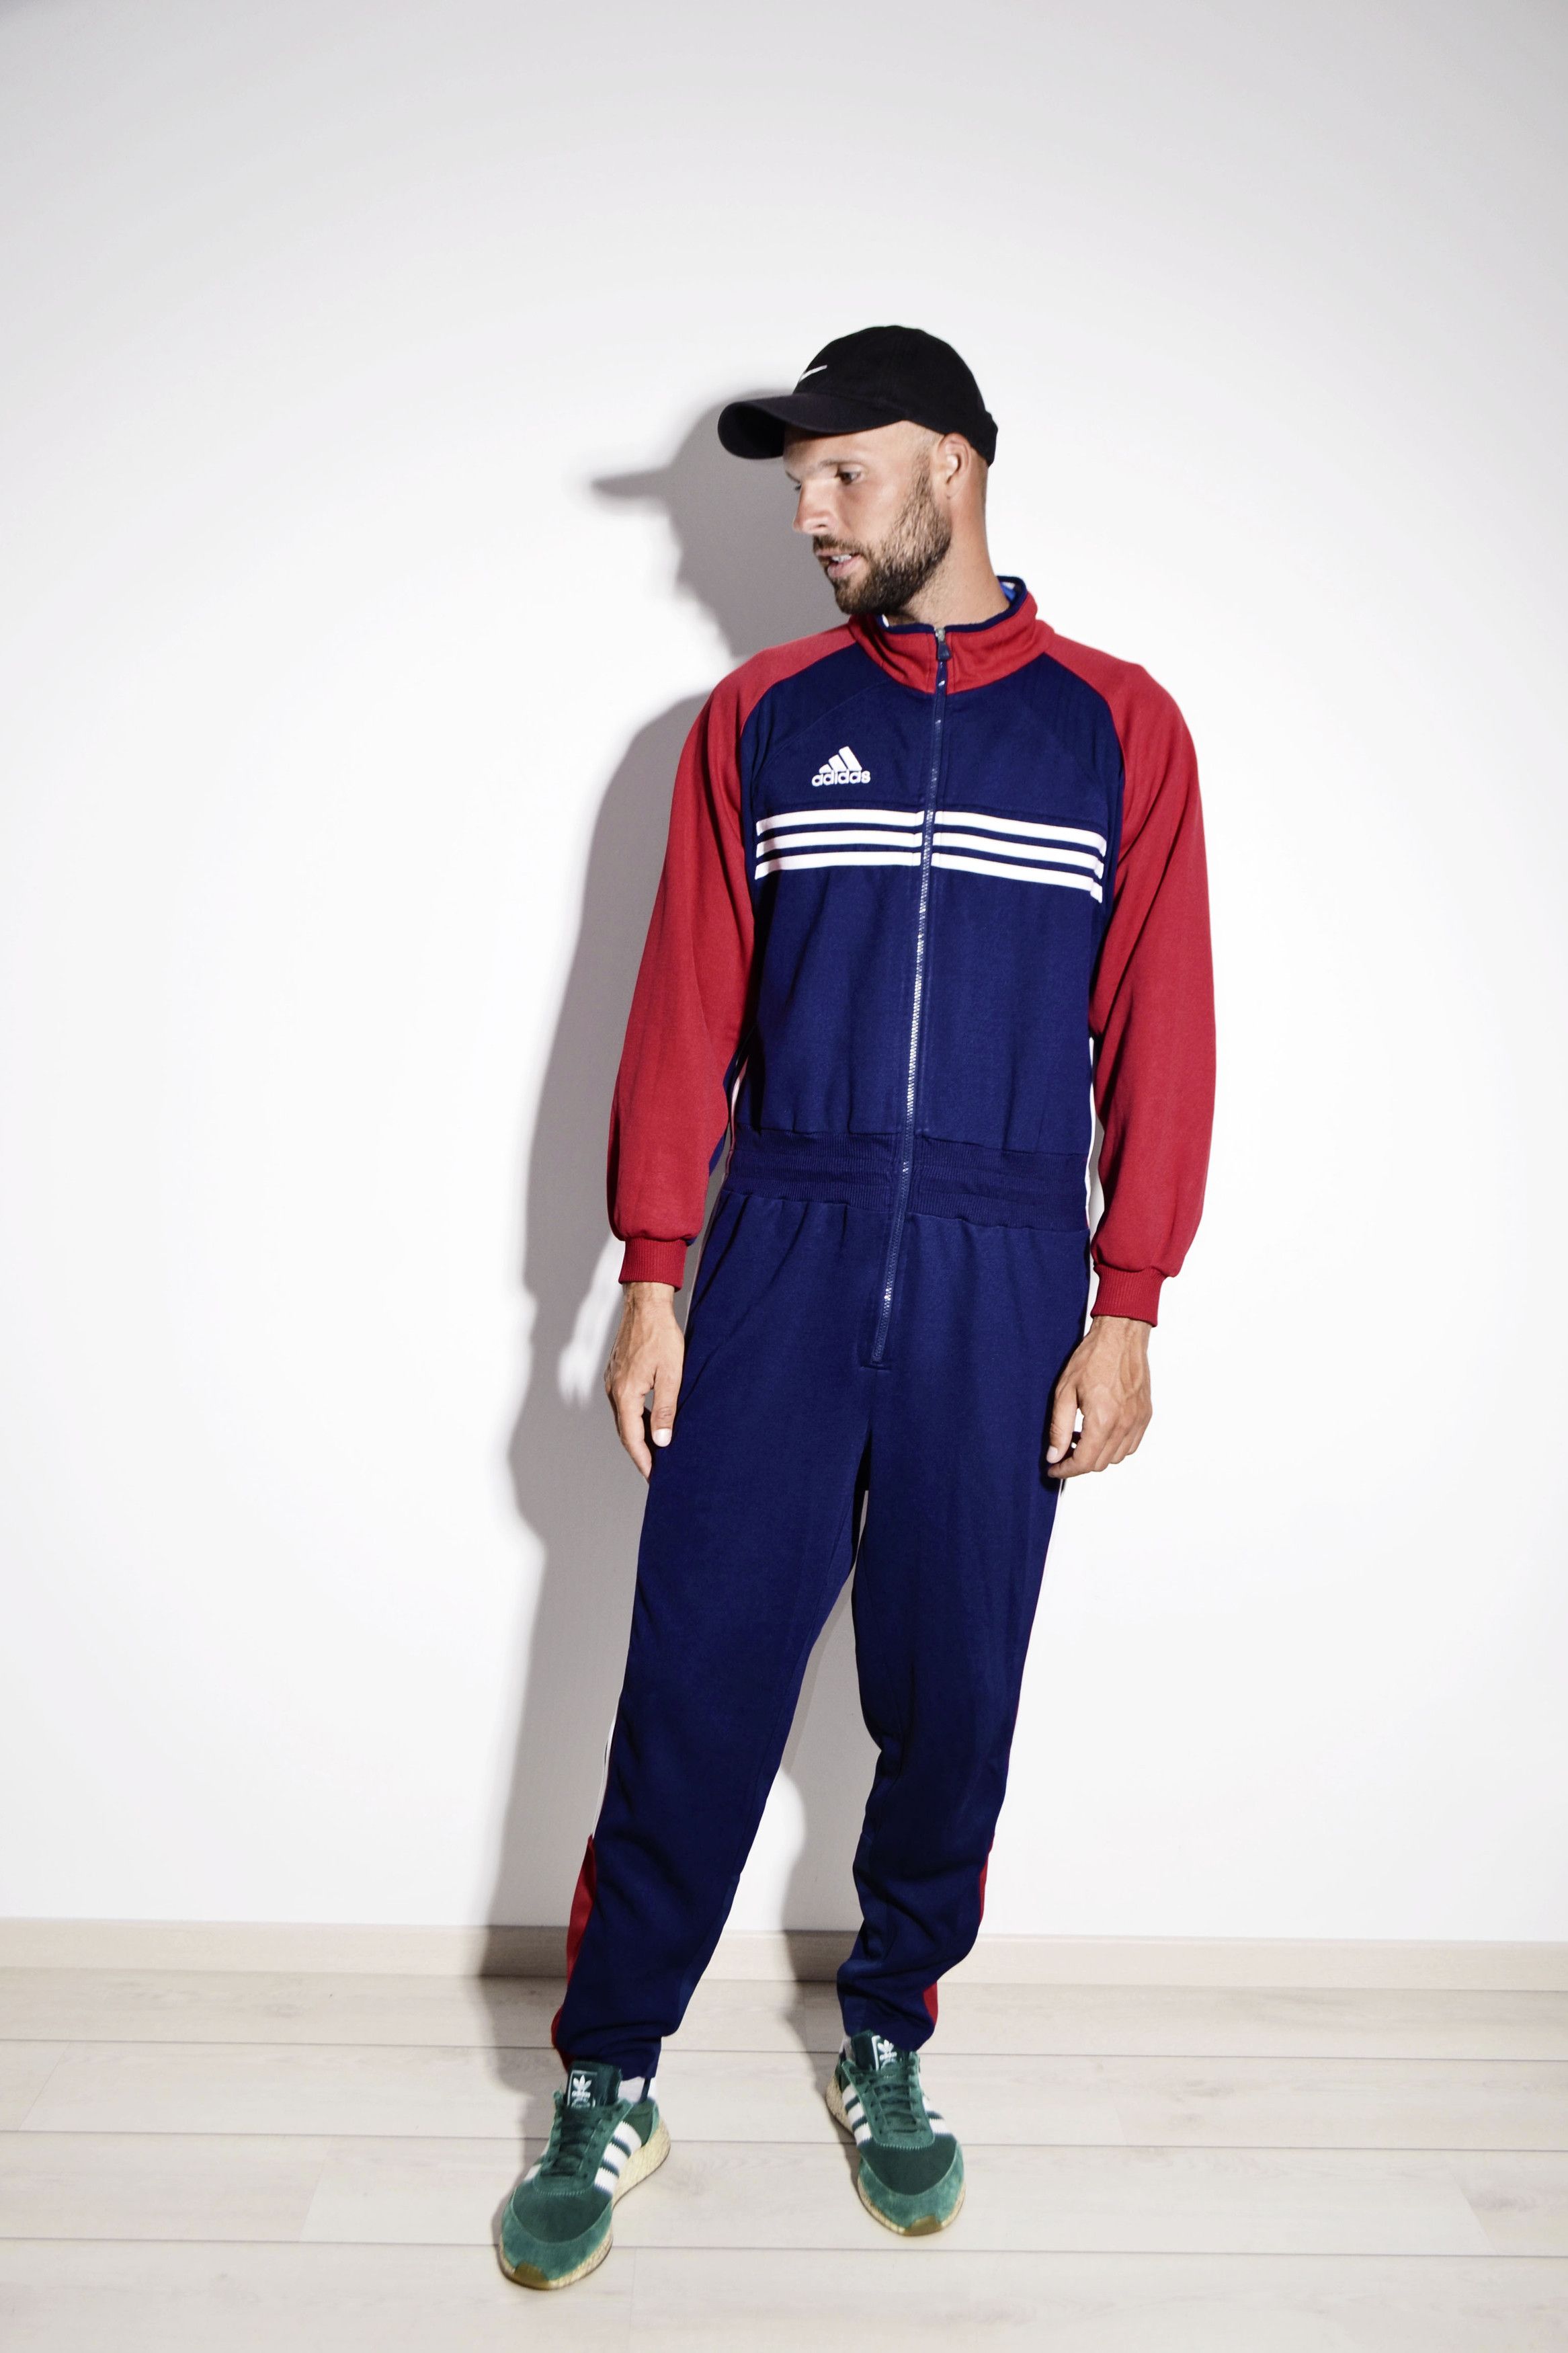 Adidas Vintage men sport onesie ADIDAS | 80s retro Old School overall full coverall jumpsuit sweatsuit one part piece tracksuit blue red | Large Size US 34 / EU 50 - 1 Preview